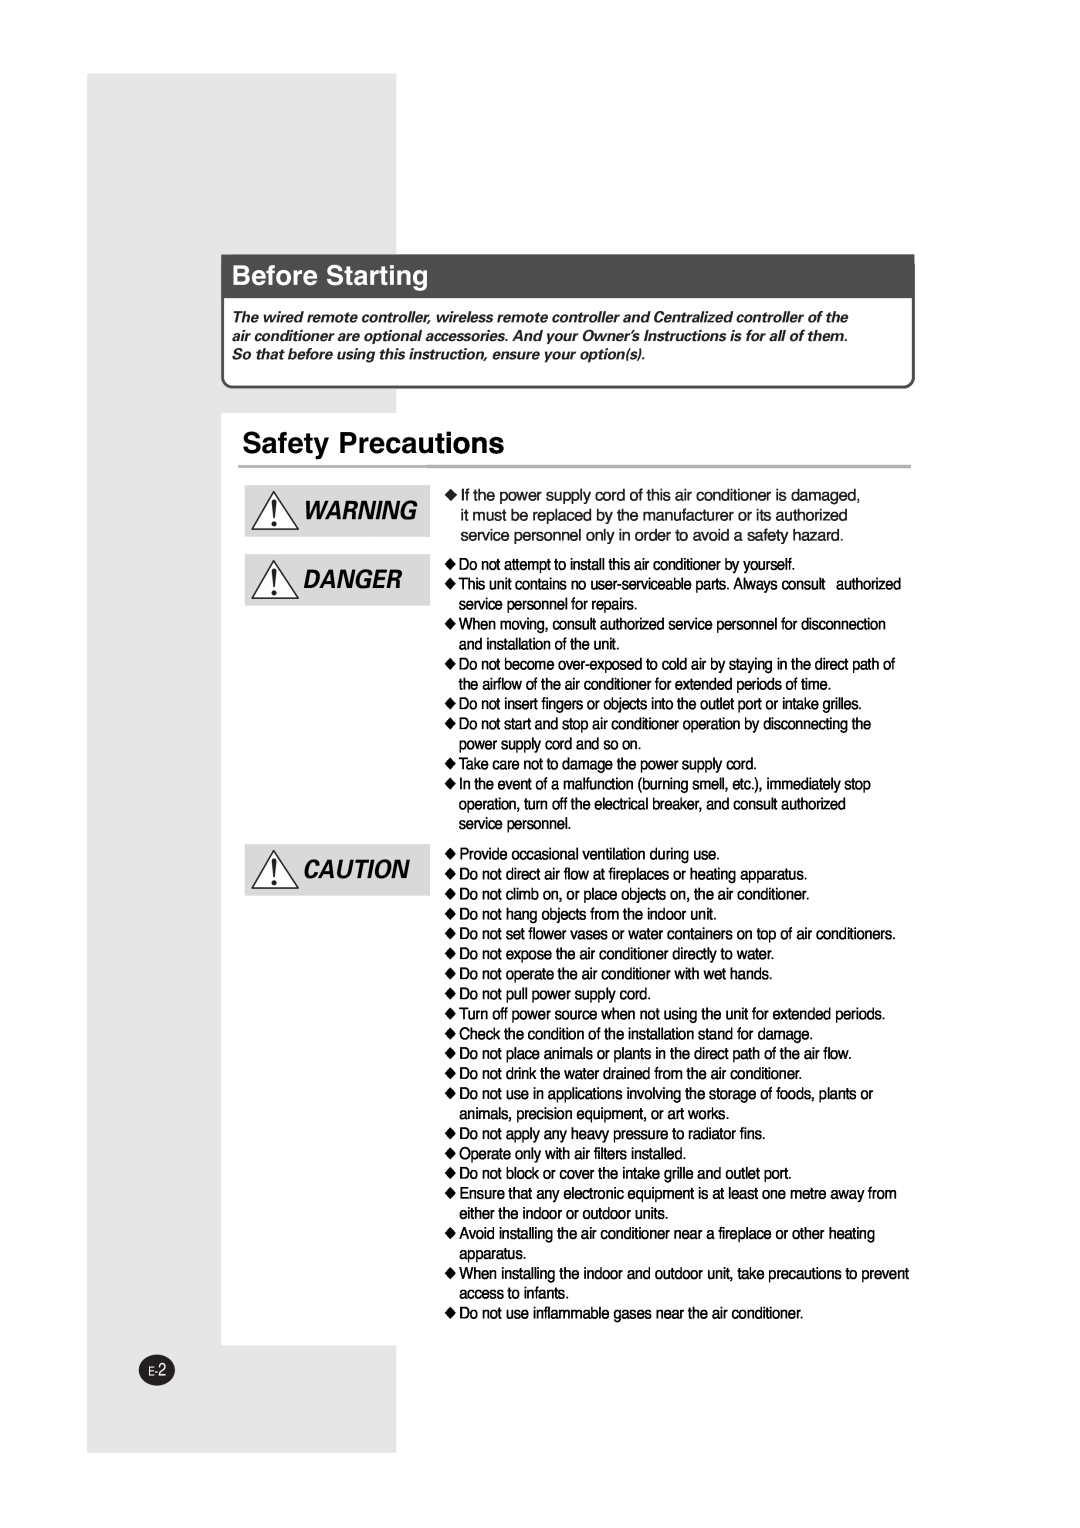 Samsung ACC2800C, UCC2800C, UCC2400C, ACC2400C installation manual Safety Precautions, Before Starting, Danger 